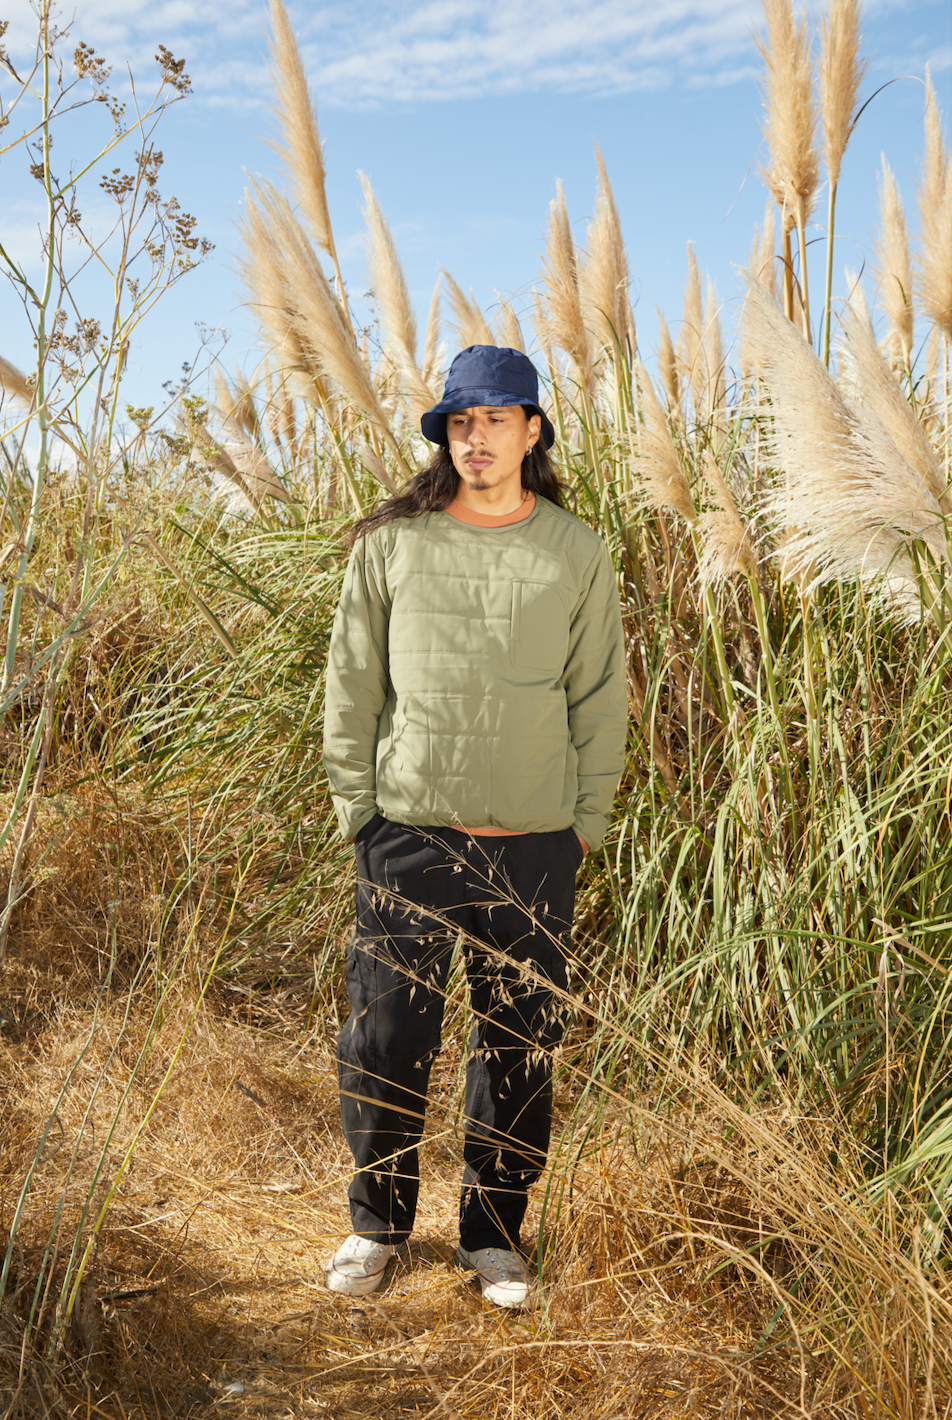 FLEXIBLE INSULATED PULLOVER - OLIVE